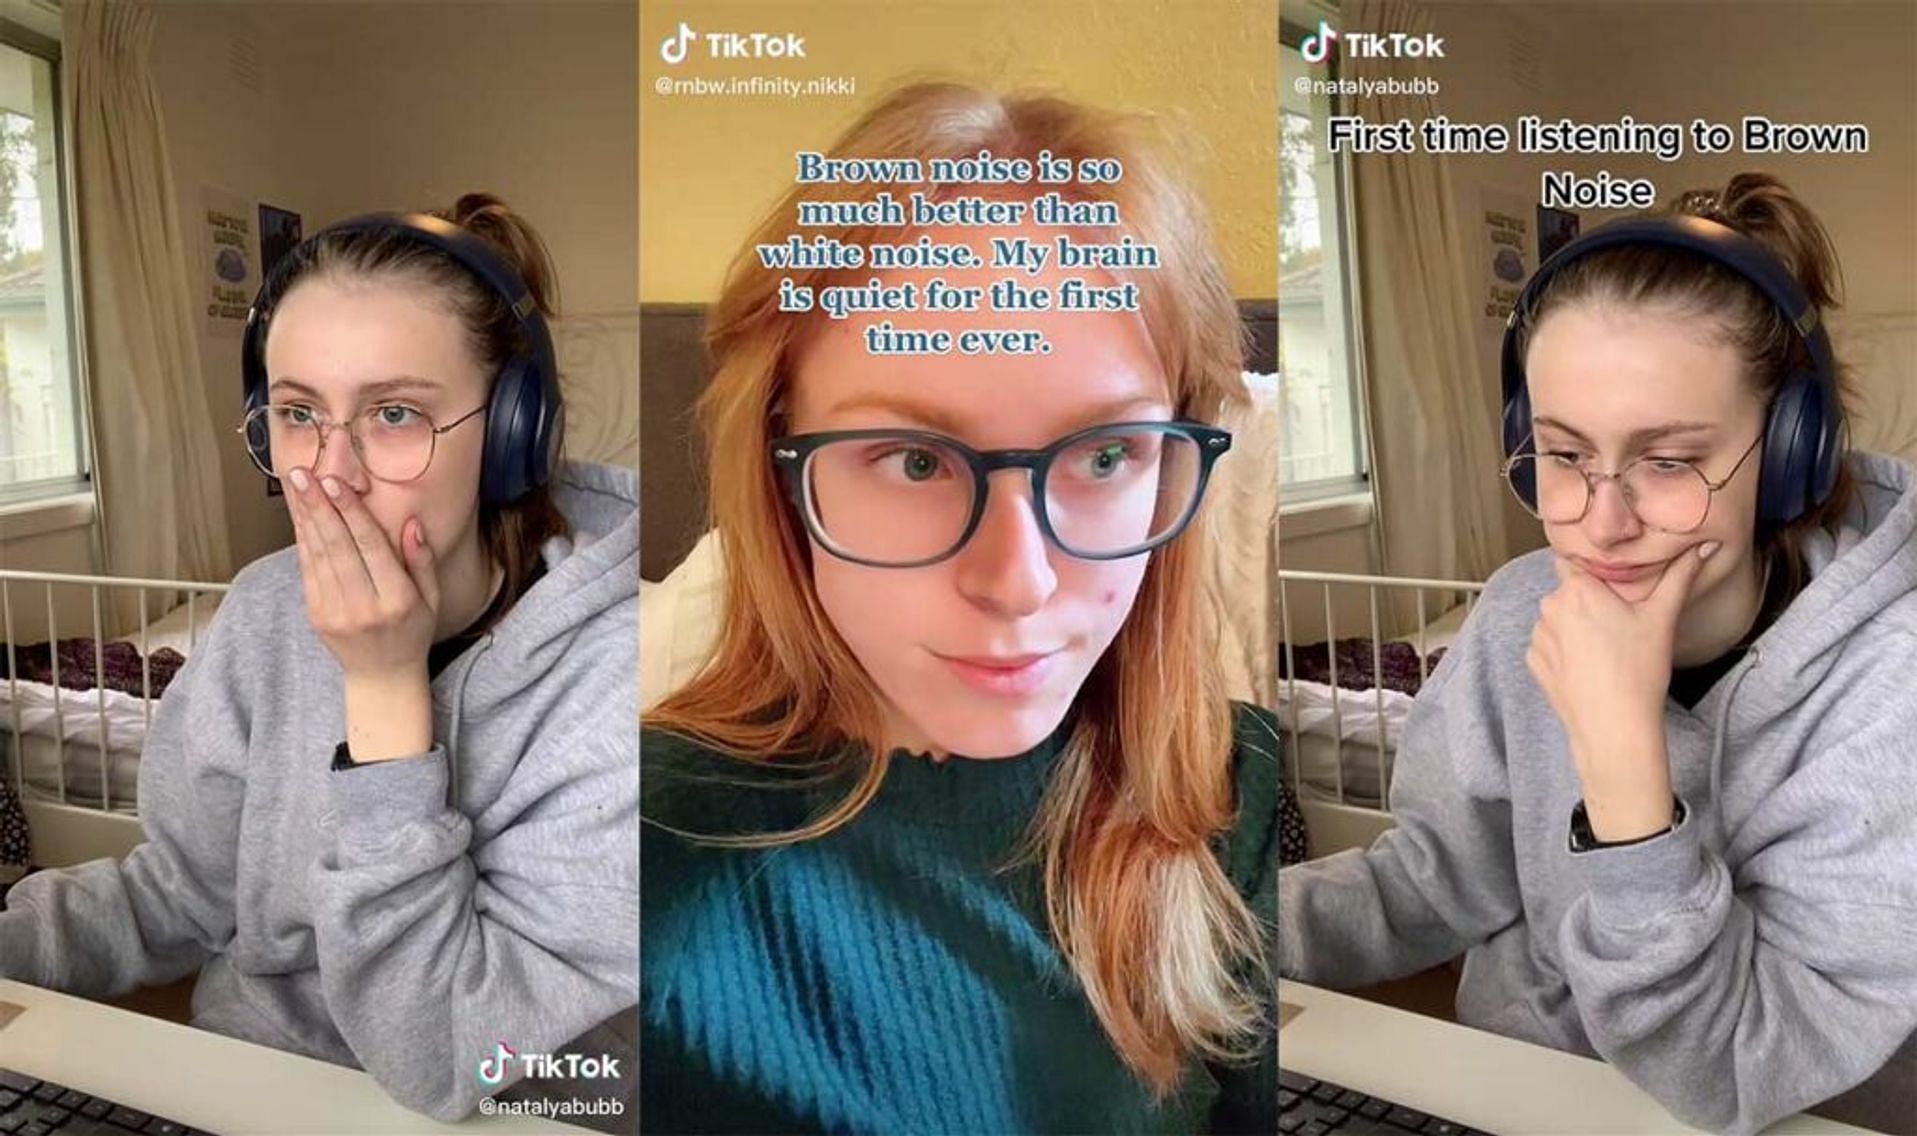 TikTokers going crazy over the Brown Noise; claiming it helps them relax and focus (Image via TikTok